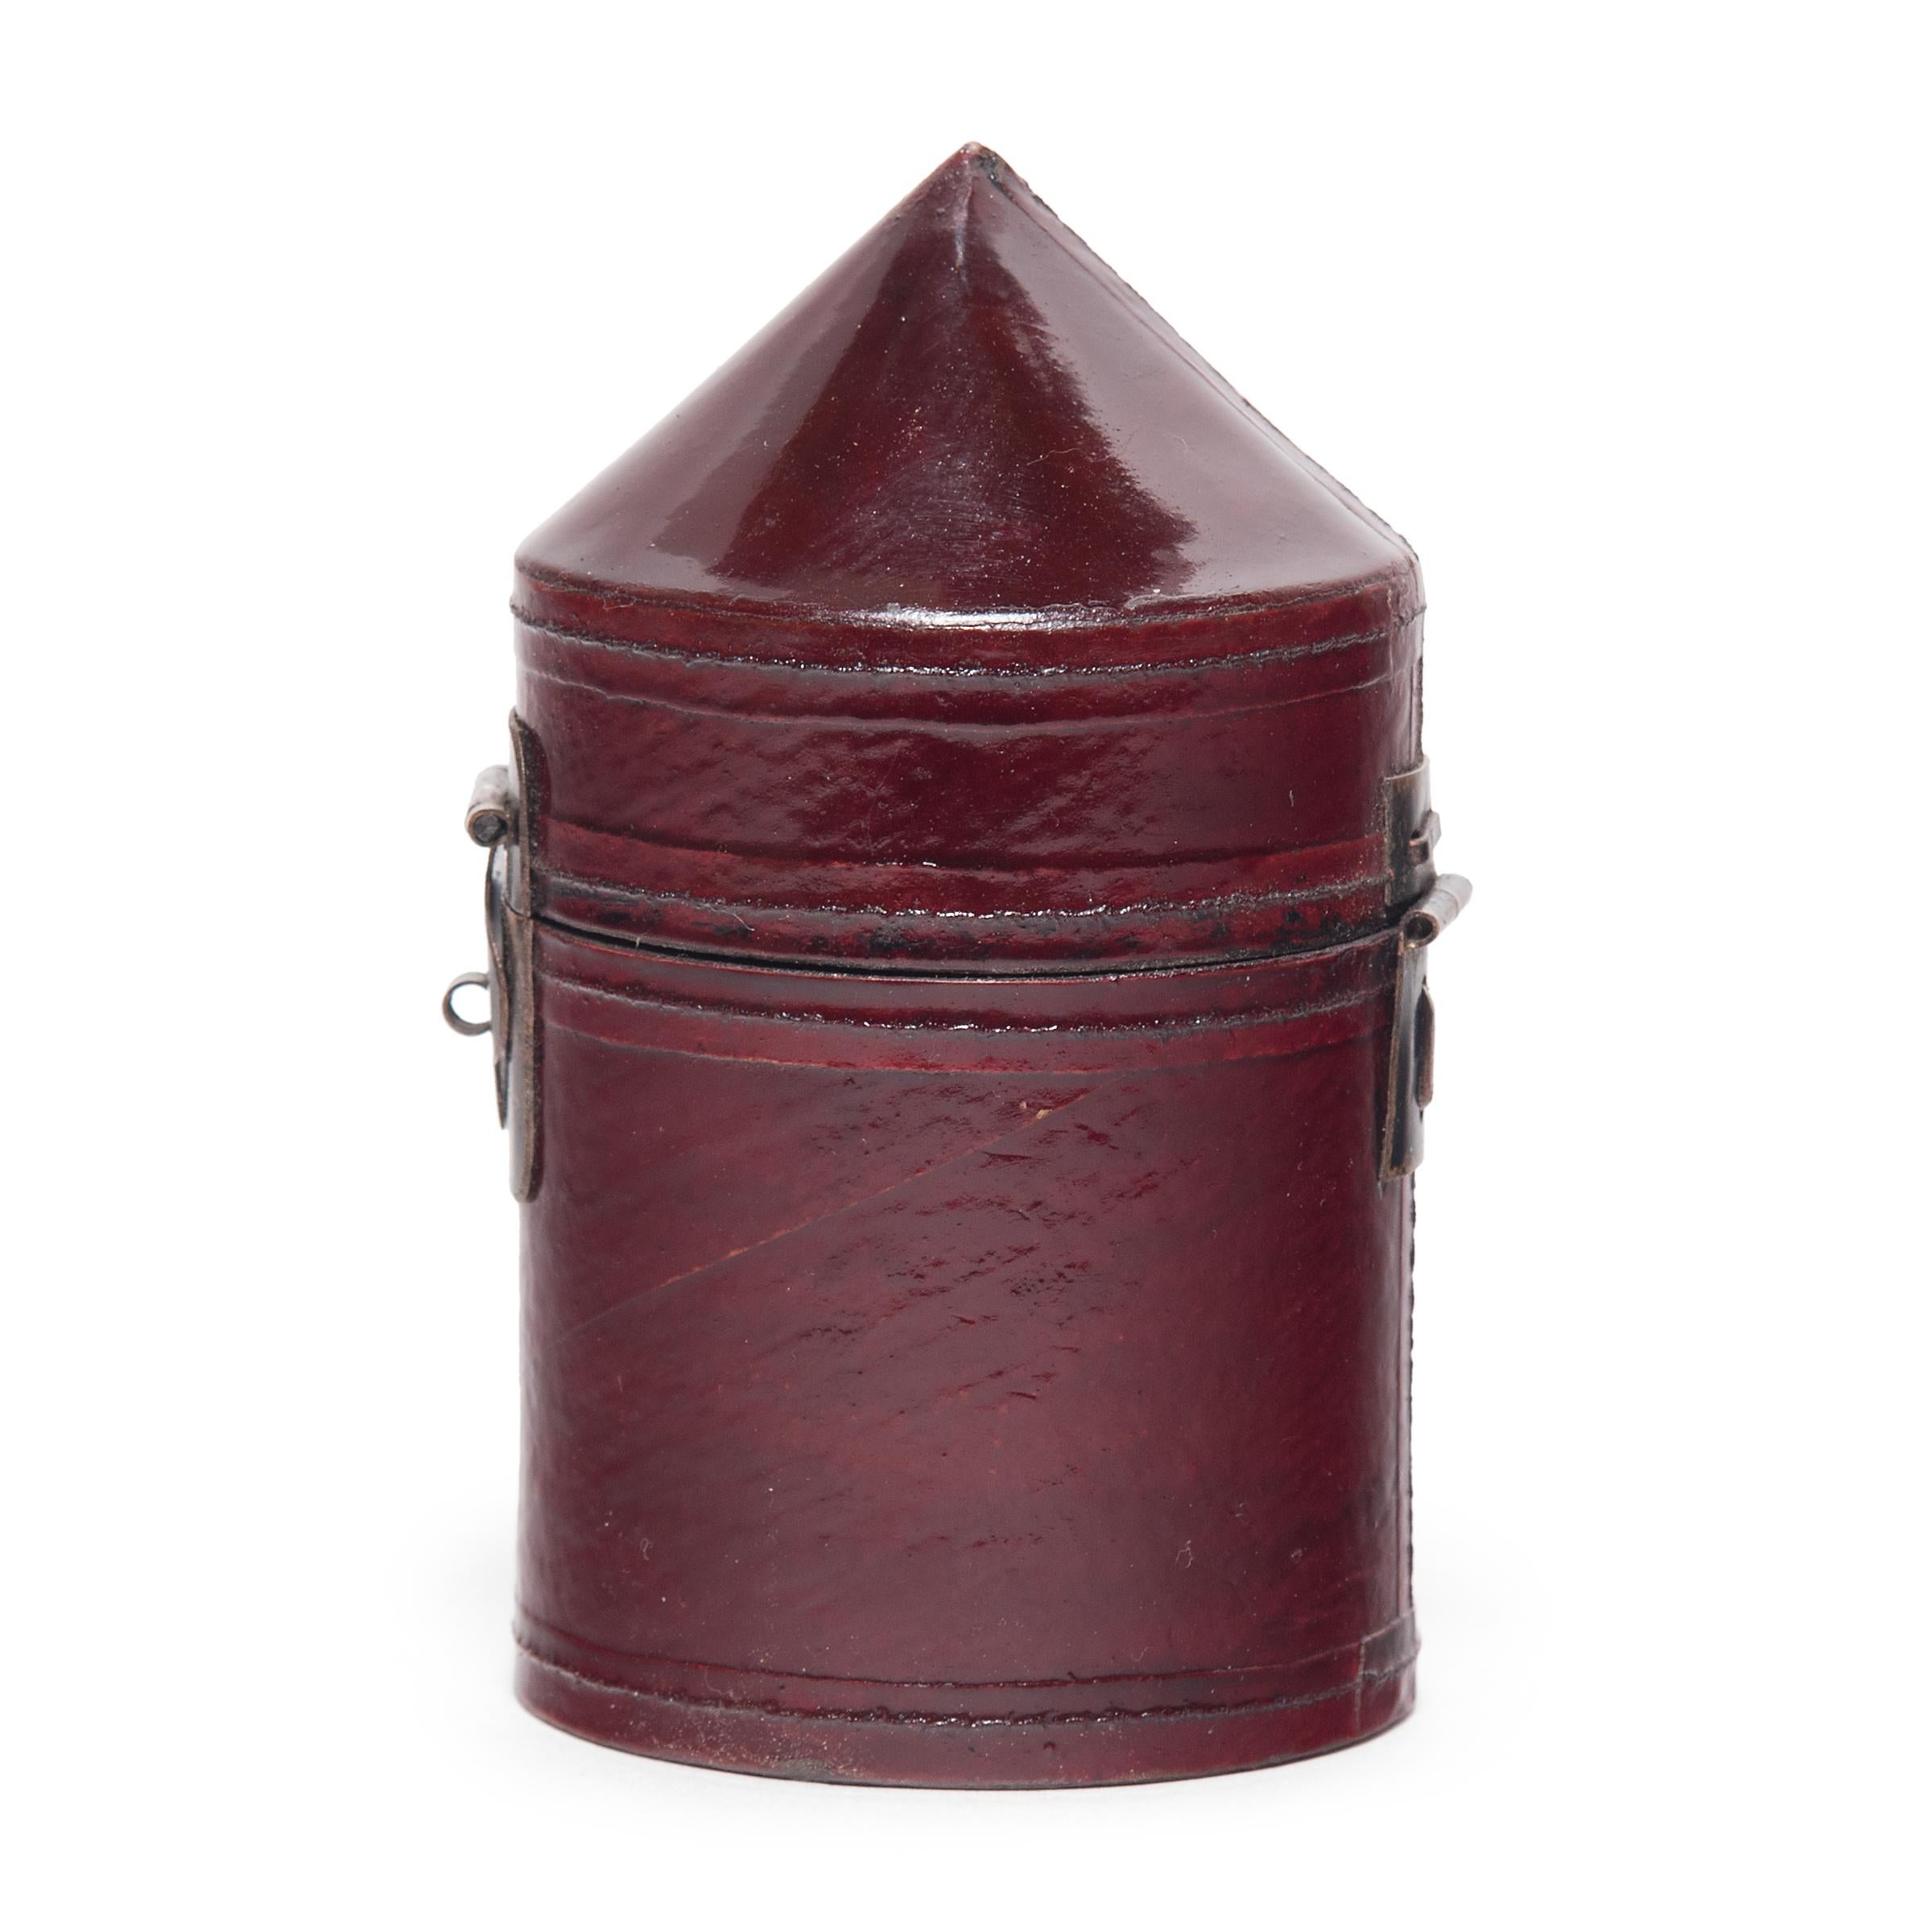 This petite cylindrical box is a miniature version of a Qing-dynasty official's hat box. As beautifully constructed as the full-size versions, this little box is finished with a layer of oxblood-red lacquered hide and a clover-form brass hinge. The